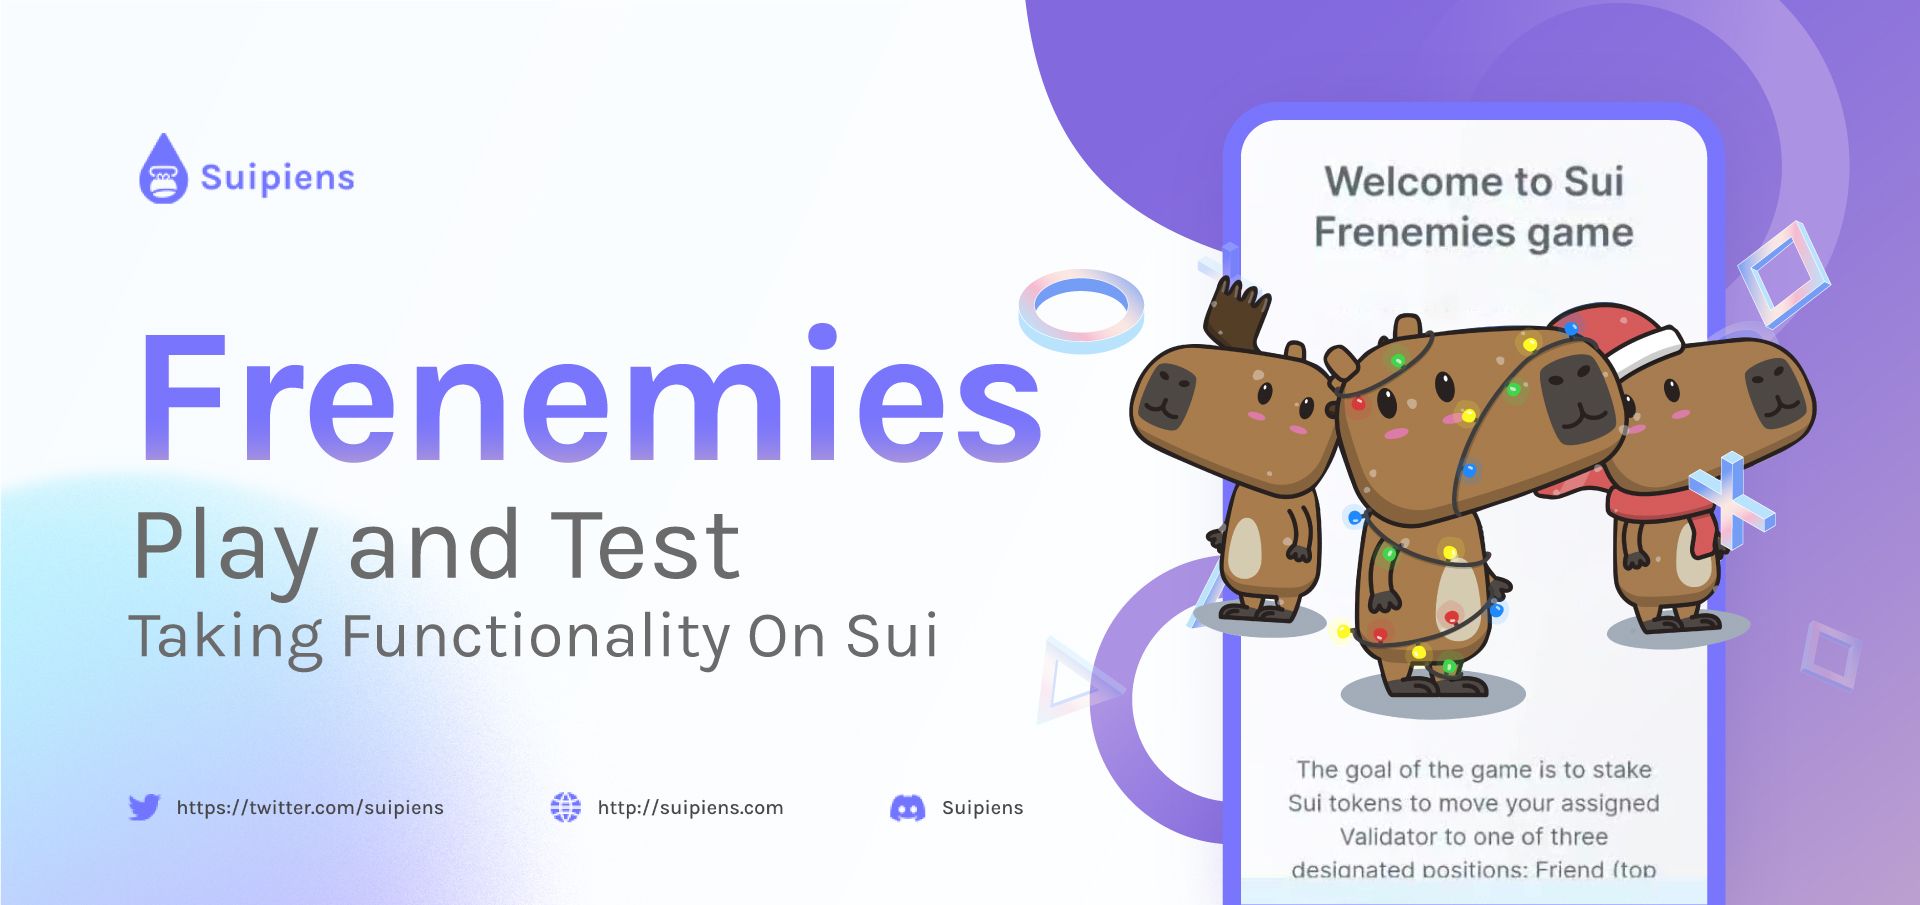 Frenemies: Play and Test-Taking Functionality On Sui